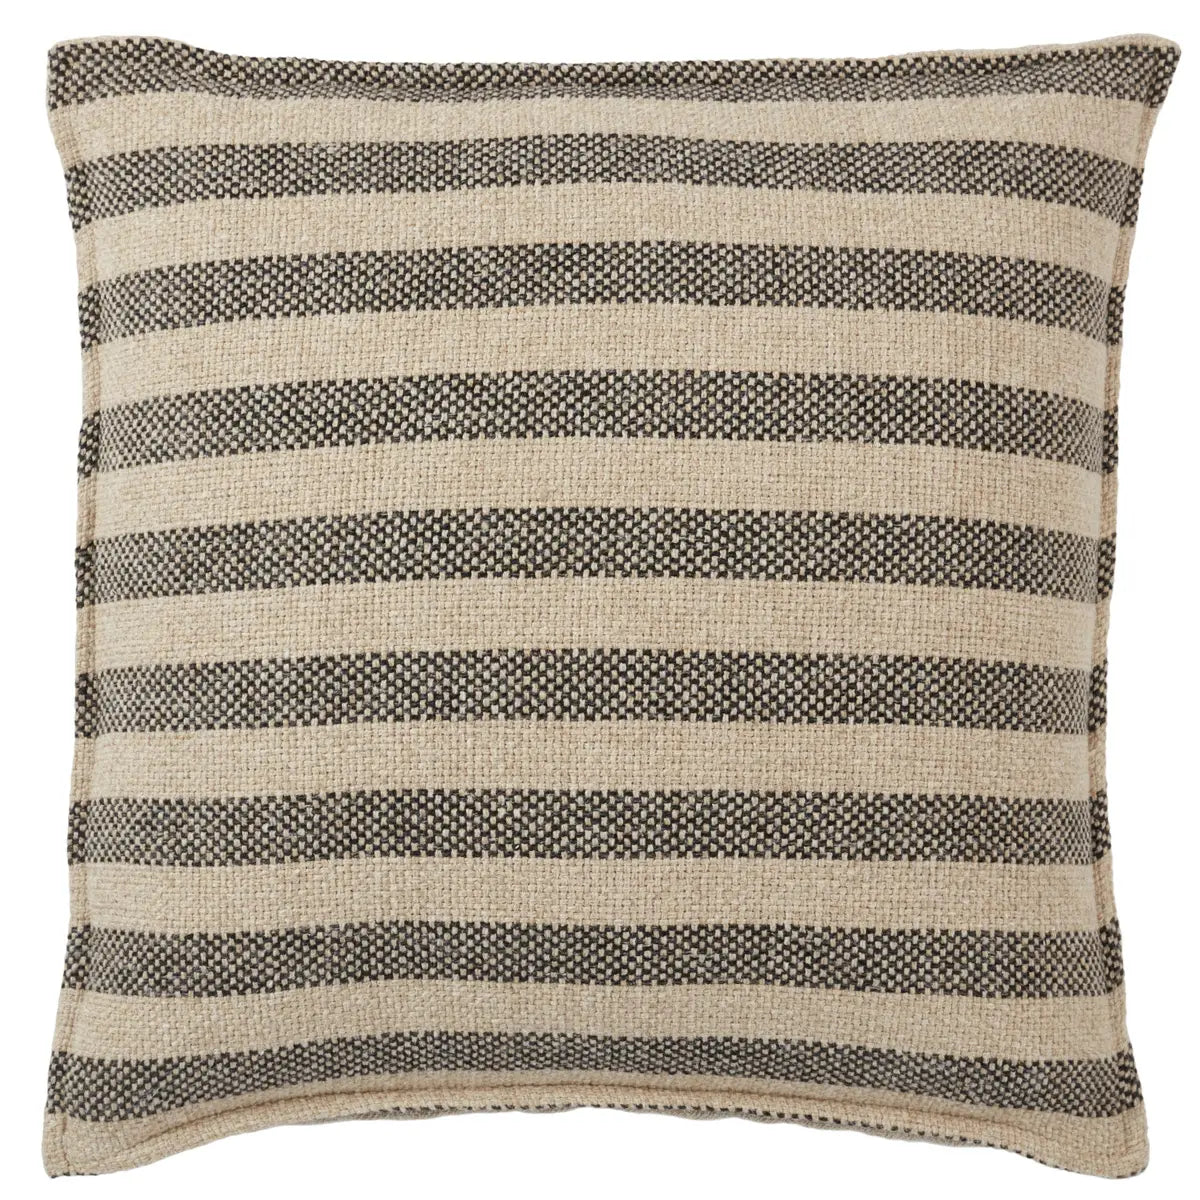 Tanzy Pillow - Light and Dark Brown